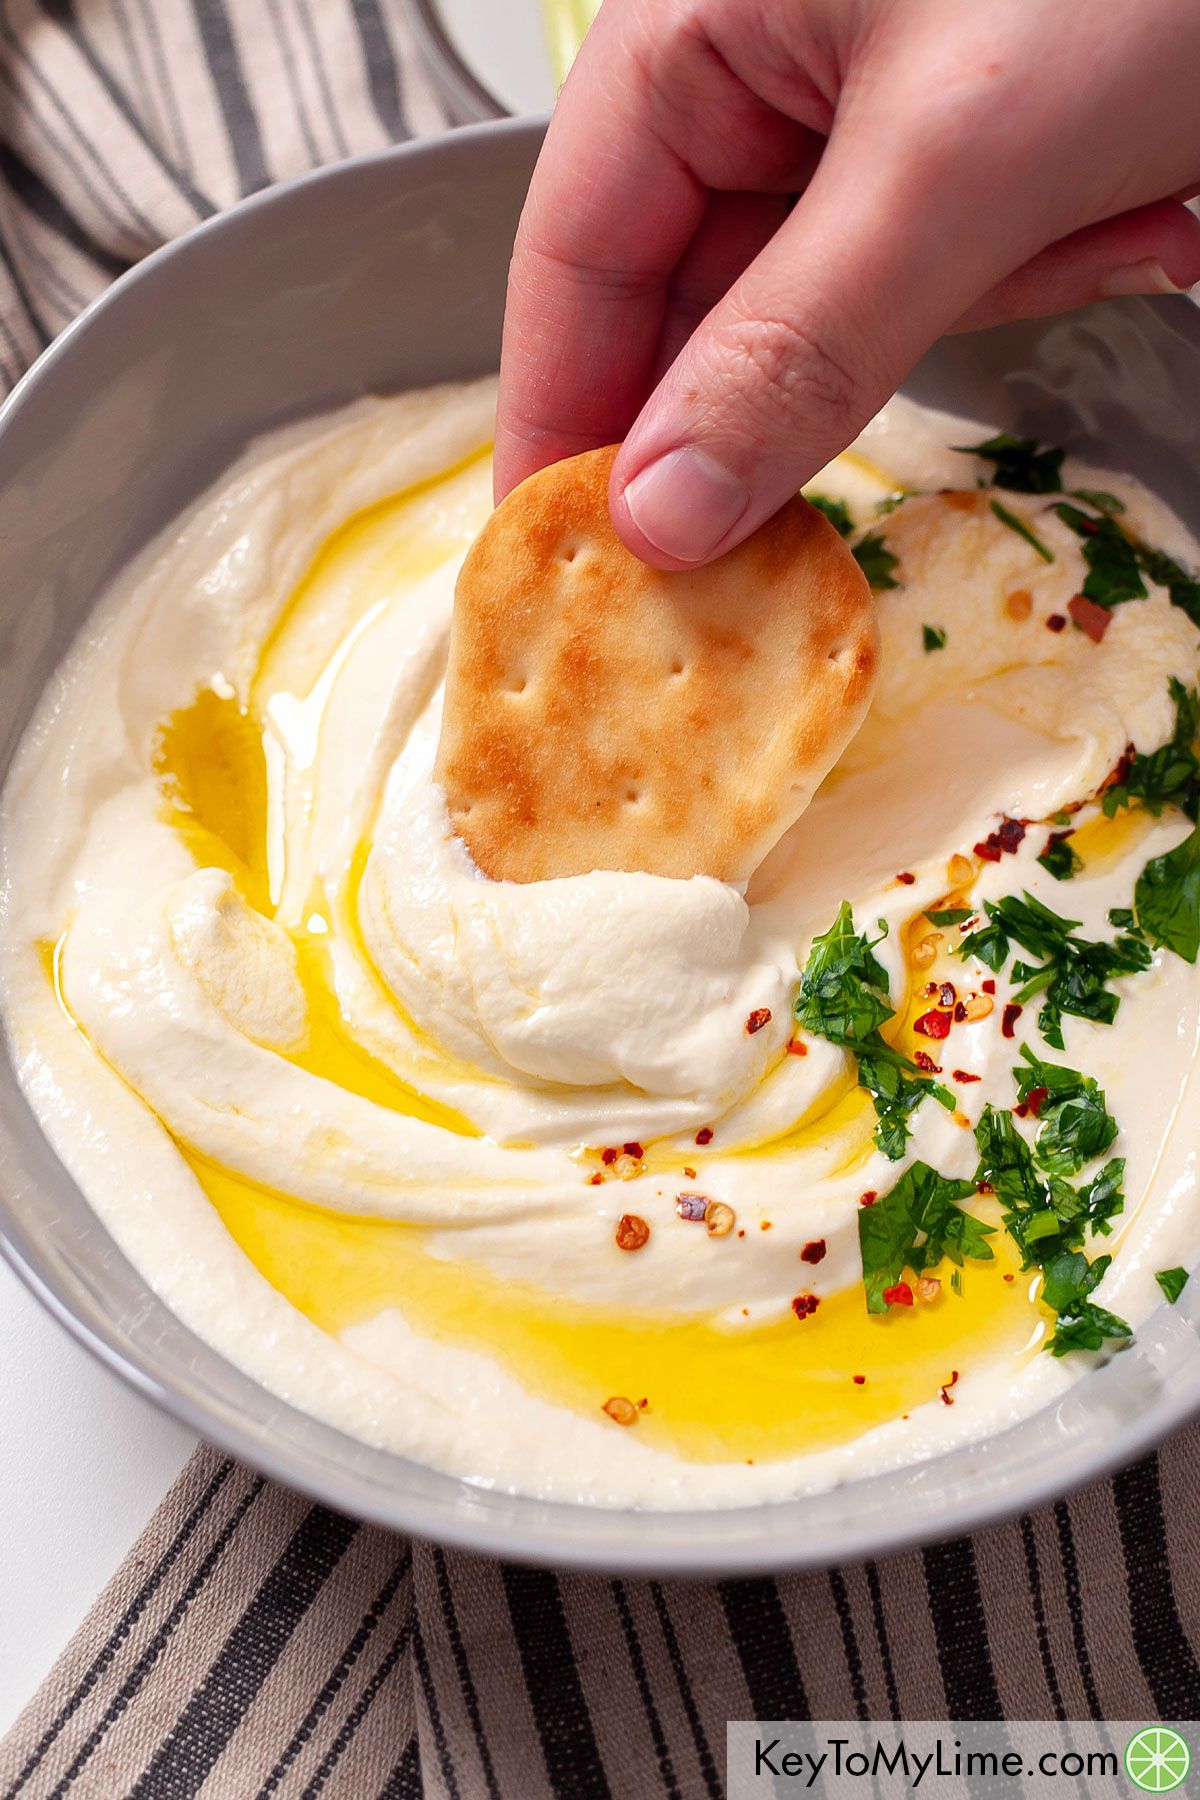 Dipping toasted pita into whipped feta dip.